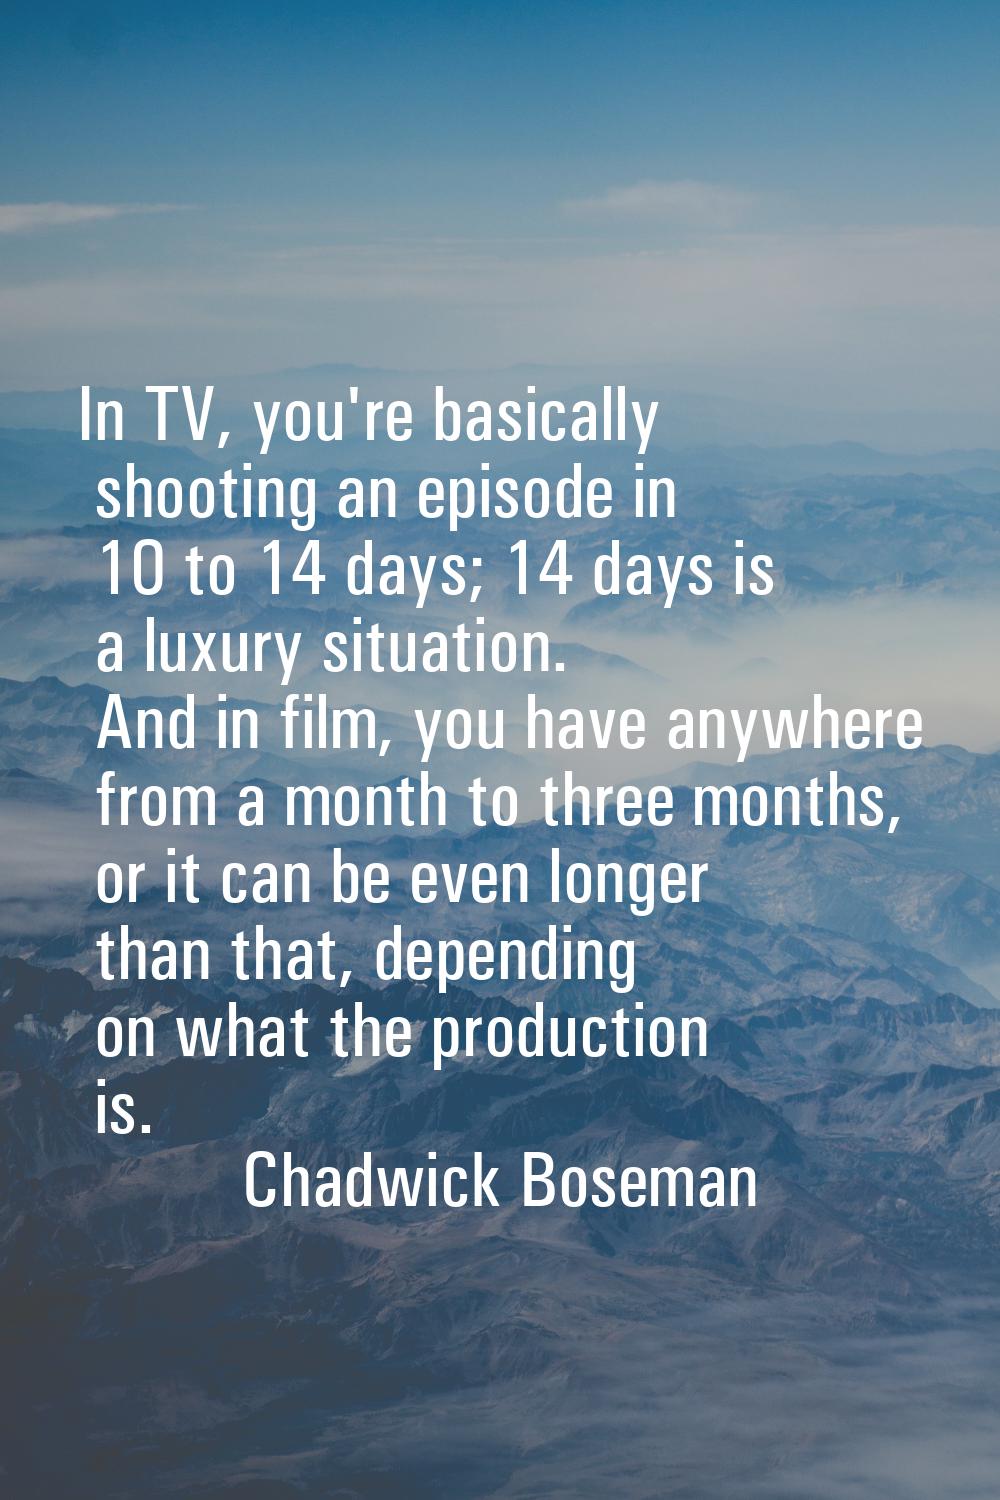 In TV, you're basically shooting an episode in 10 to 14 days; 14 days is a luxury situation. And in